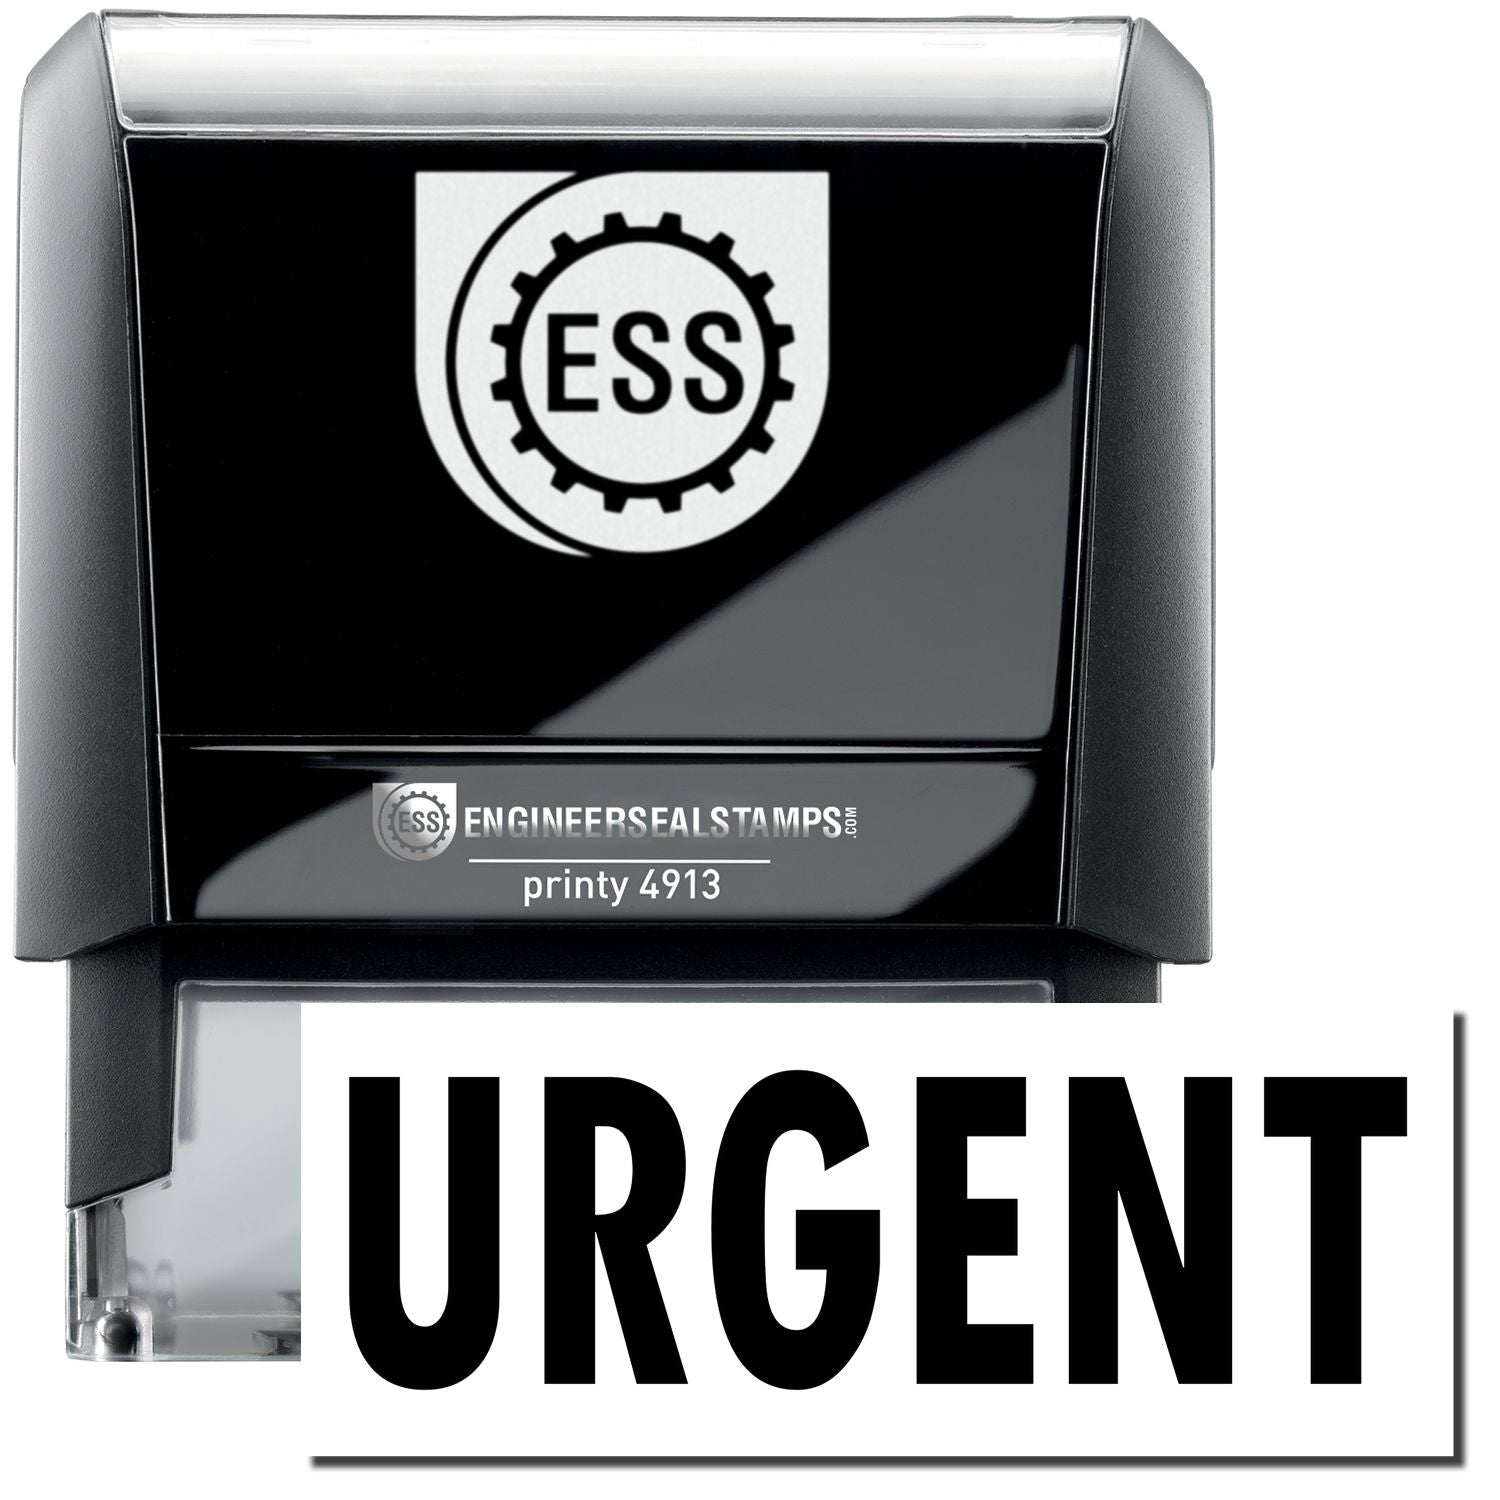 A self-inking stamp with a stamped image showing how the text "URGENT" in a large bold font is displayed by it.